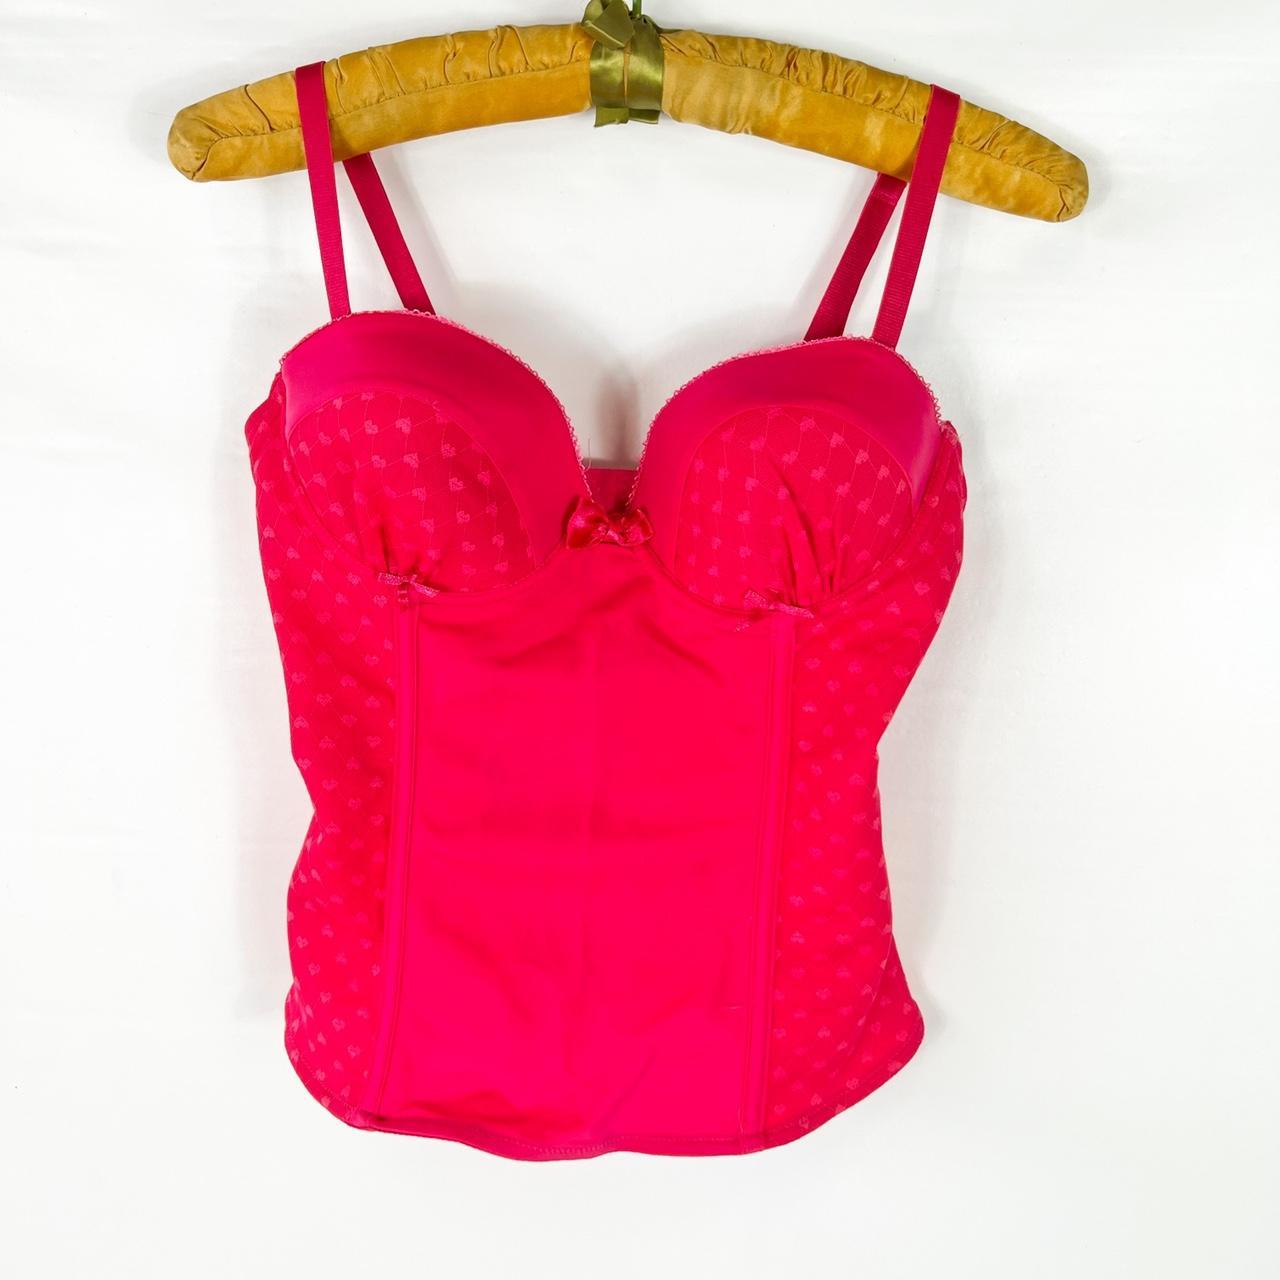 Product Image 1 - Bright pink corset tank top
Pink